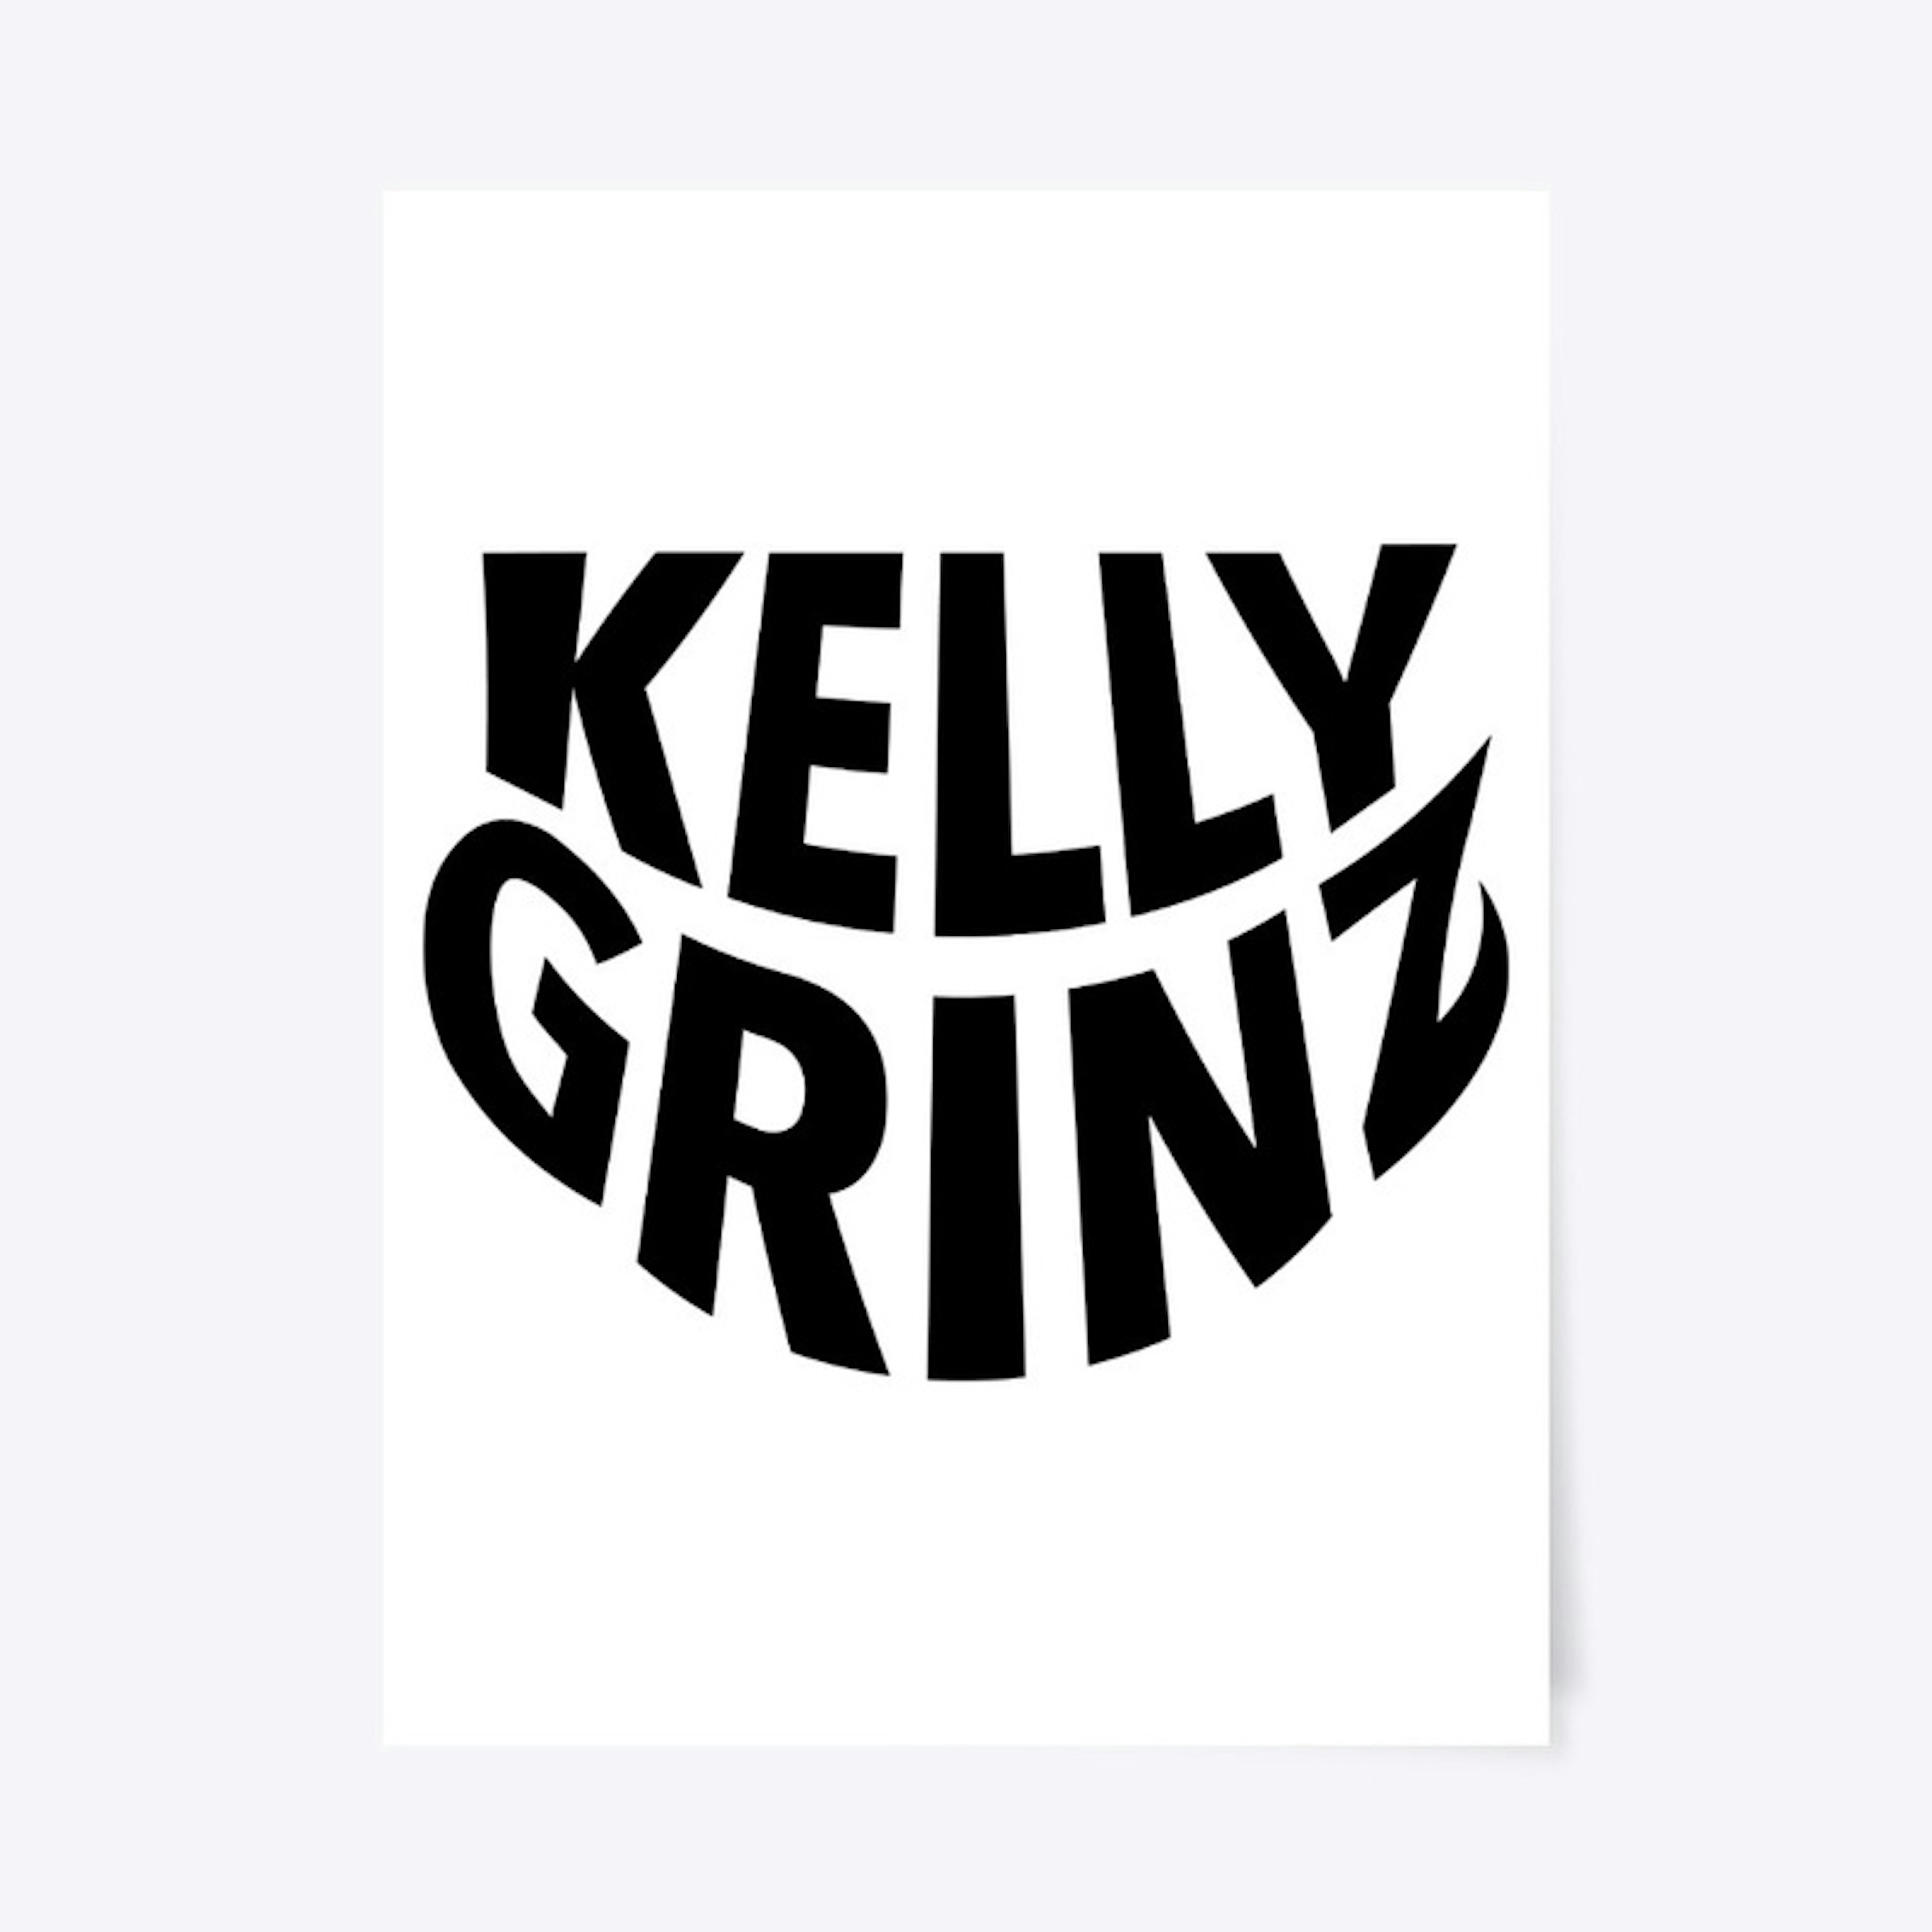 AT HOME WITH KELLY GRINZ